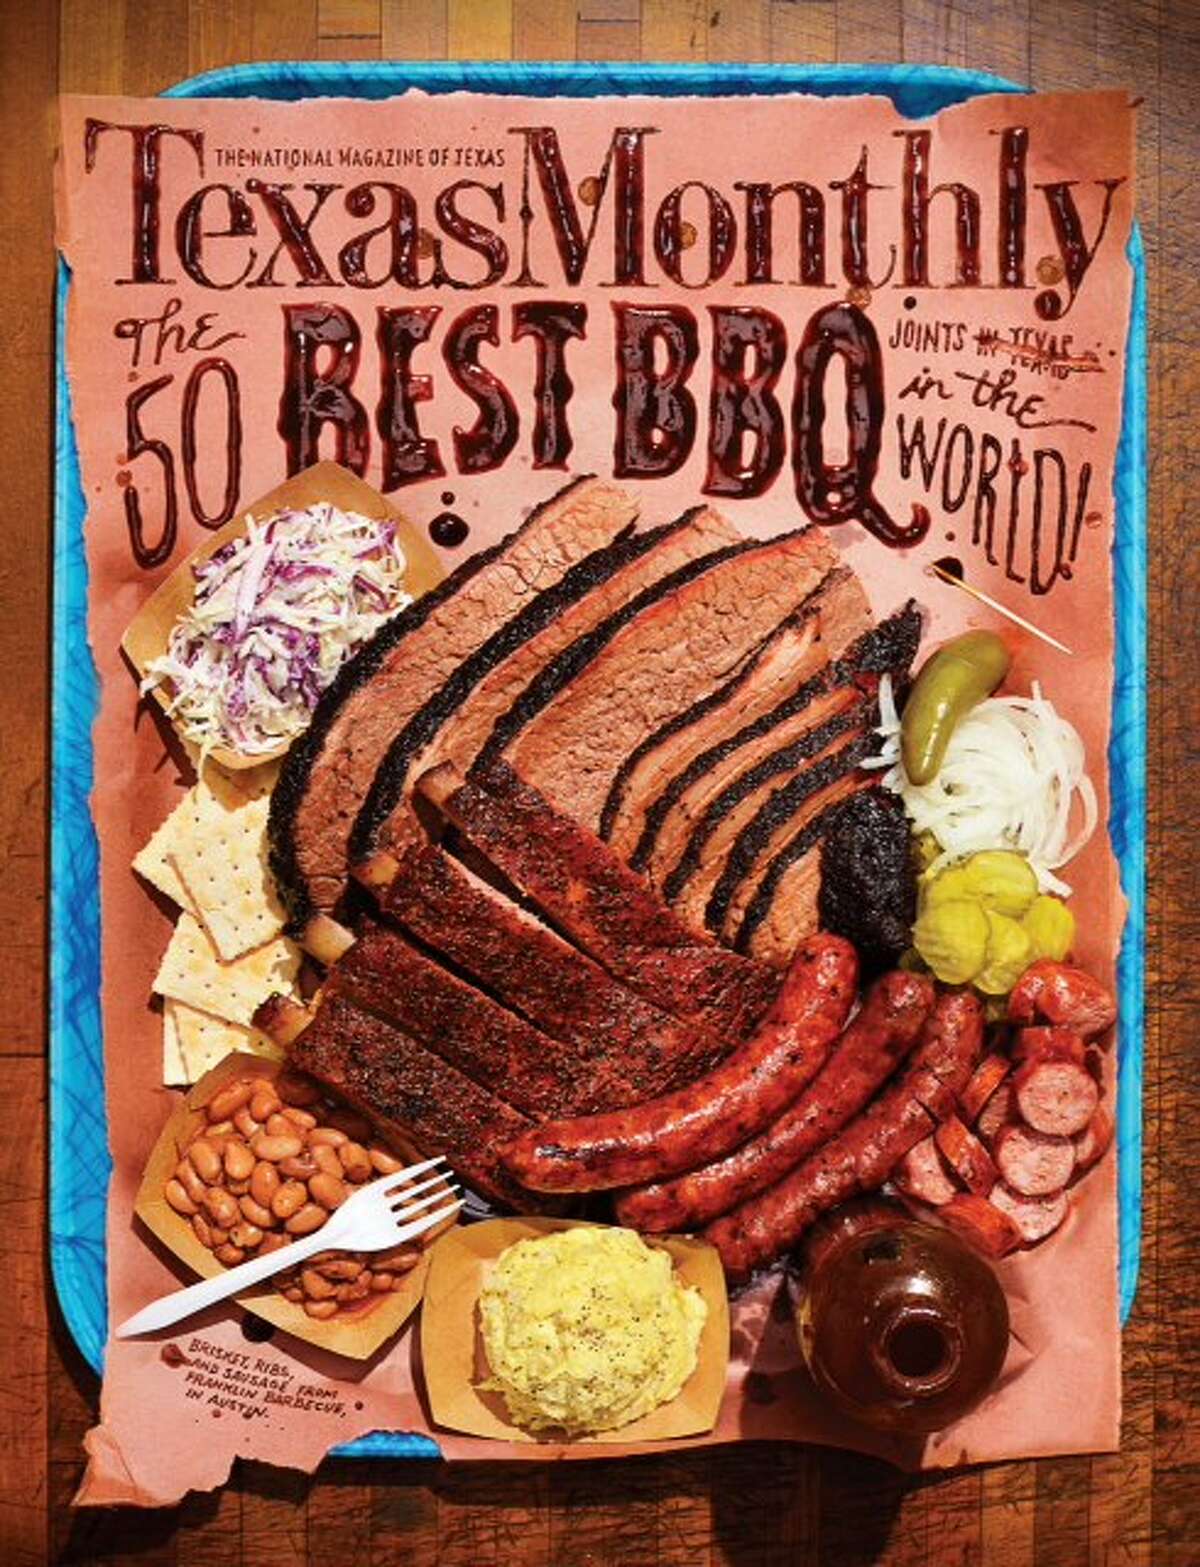 Pat Sharpe edits Texas Monthly's Barbecue Issue, on newsstands today.